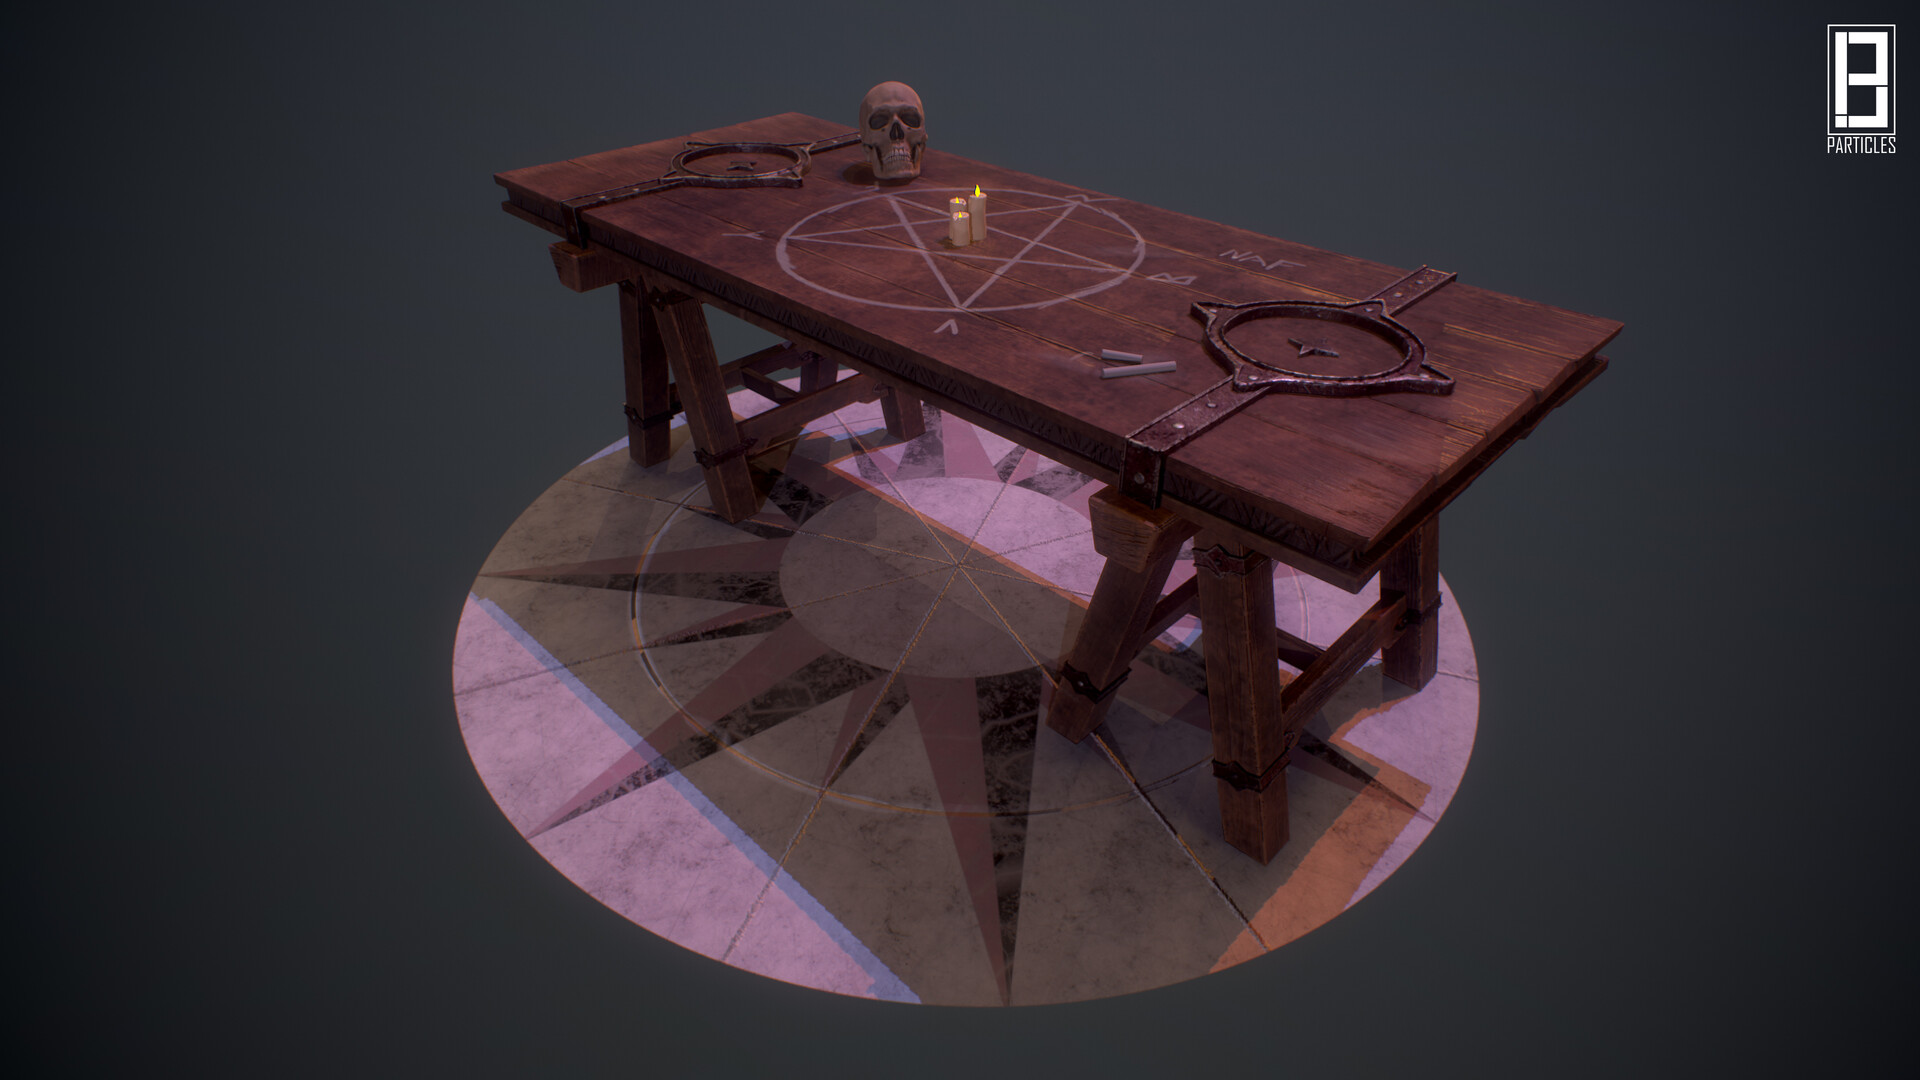 13 Particles Studio - Ritual Table ( In House Project )